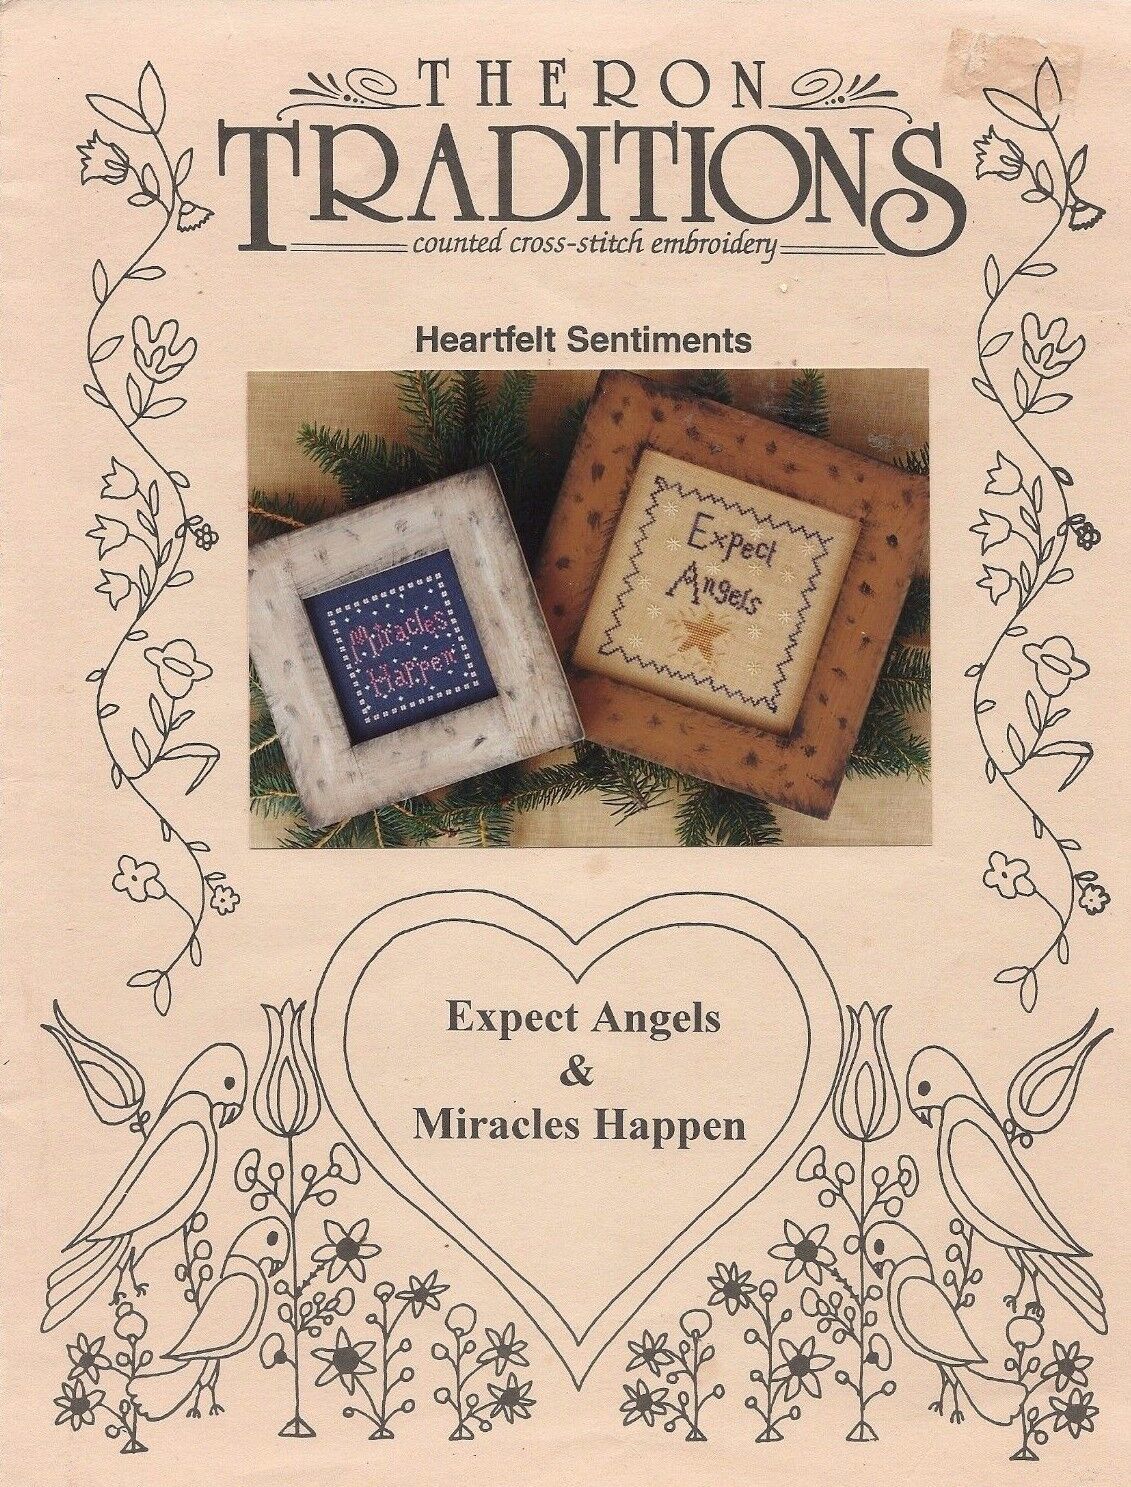 Theron Traditions Heartfelt Sentiments Vintage Counted Cross Stitch Pattern - $4.90